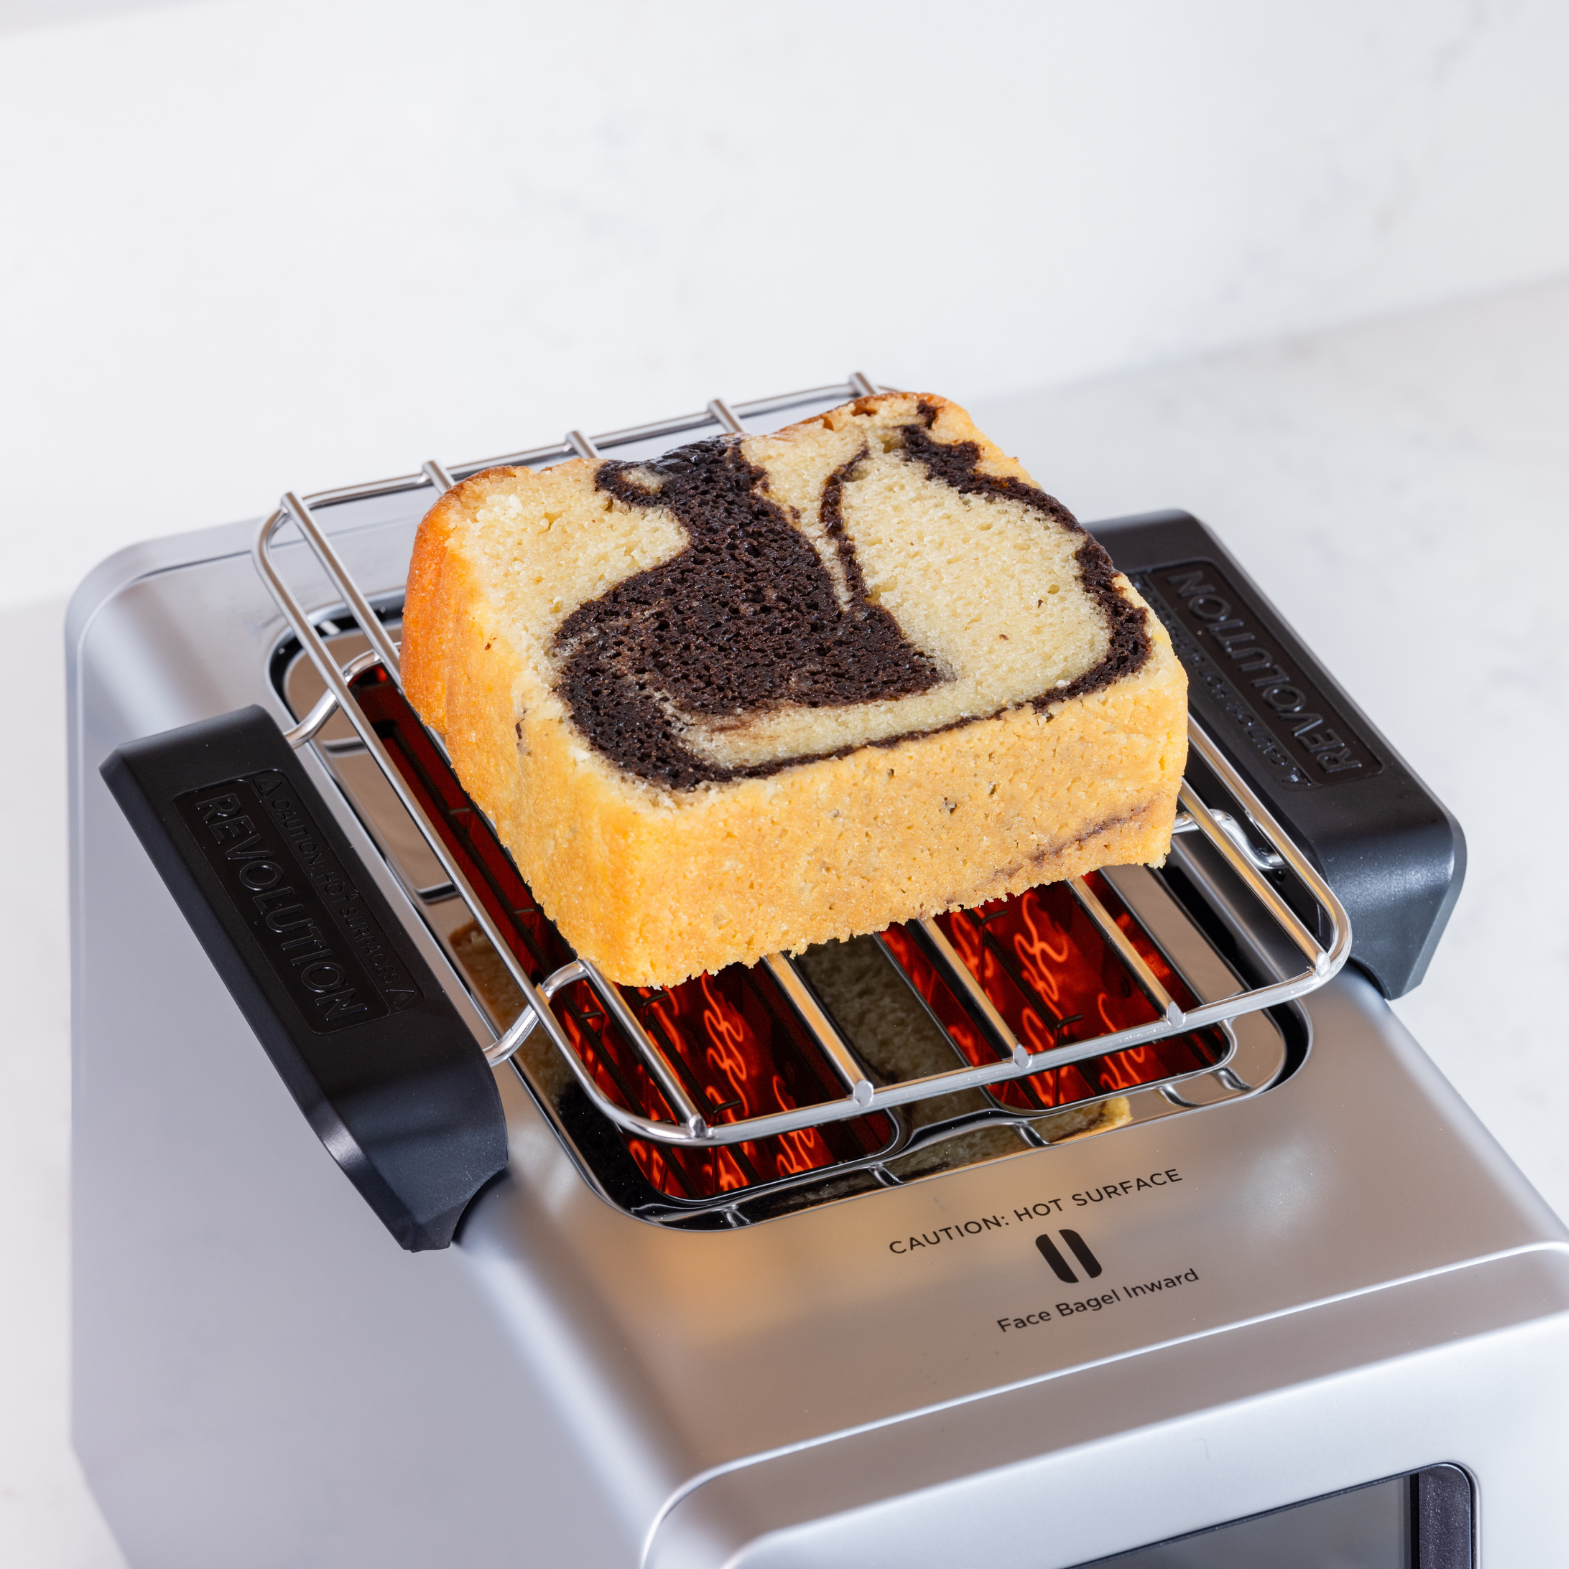 Warming Rack for Revolution InstaGLO® Toasters